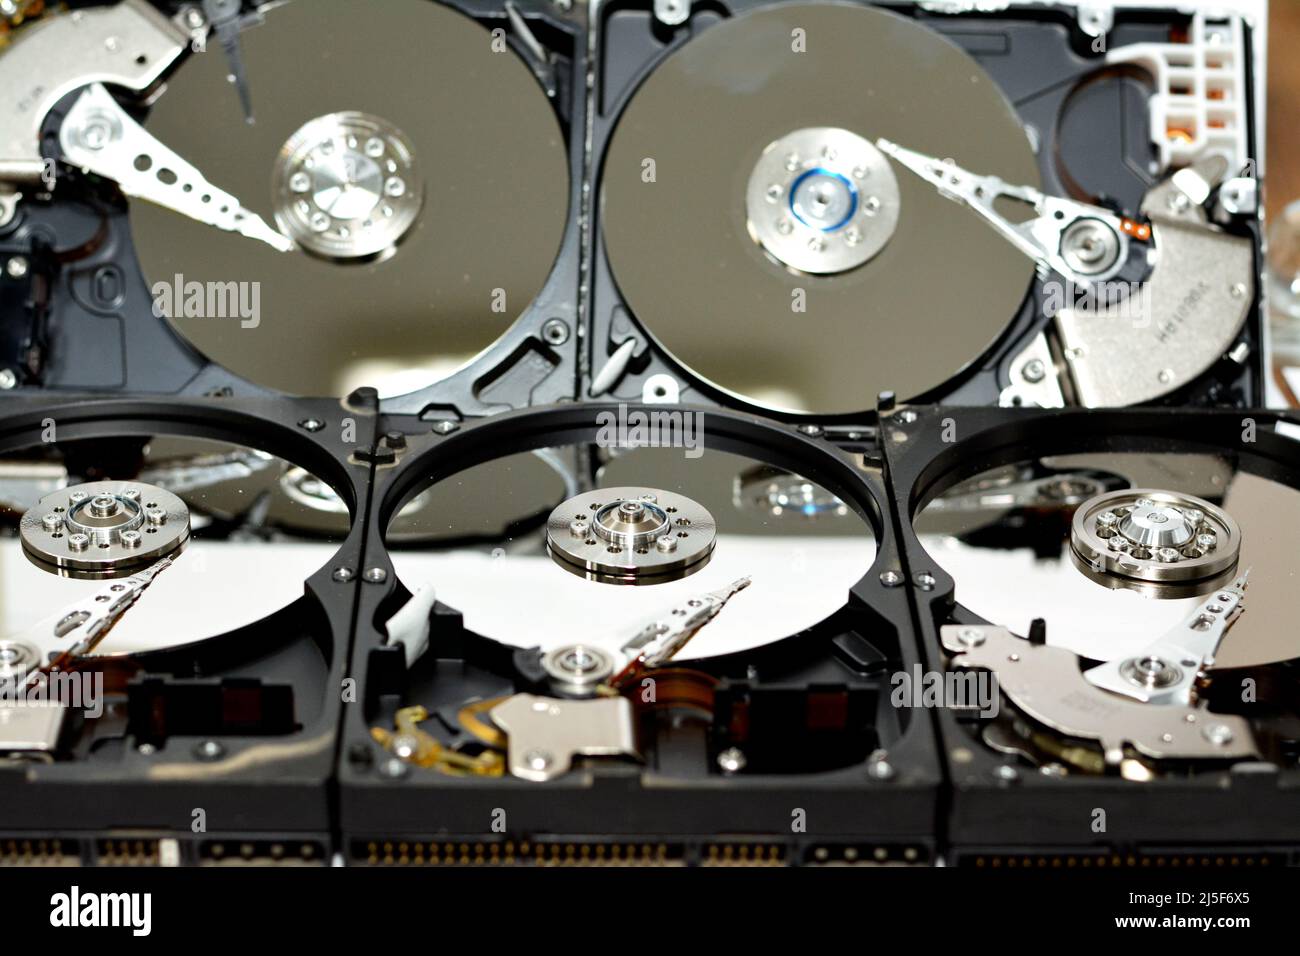 Computer hard disk drive storage memory, repair broken computer part, close up of open hard disc with platters, spindle, actuator and read, write head Stock Photo